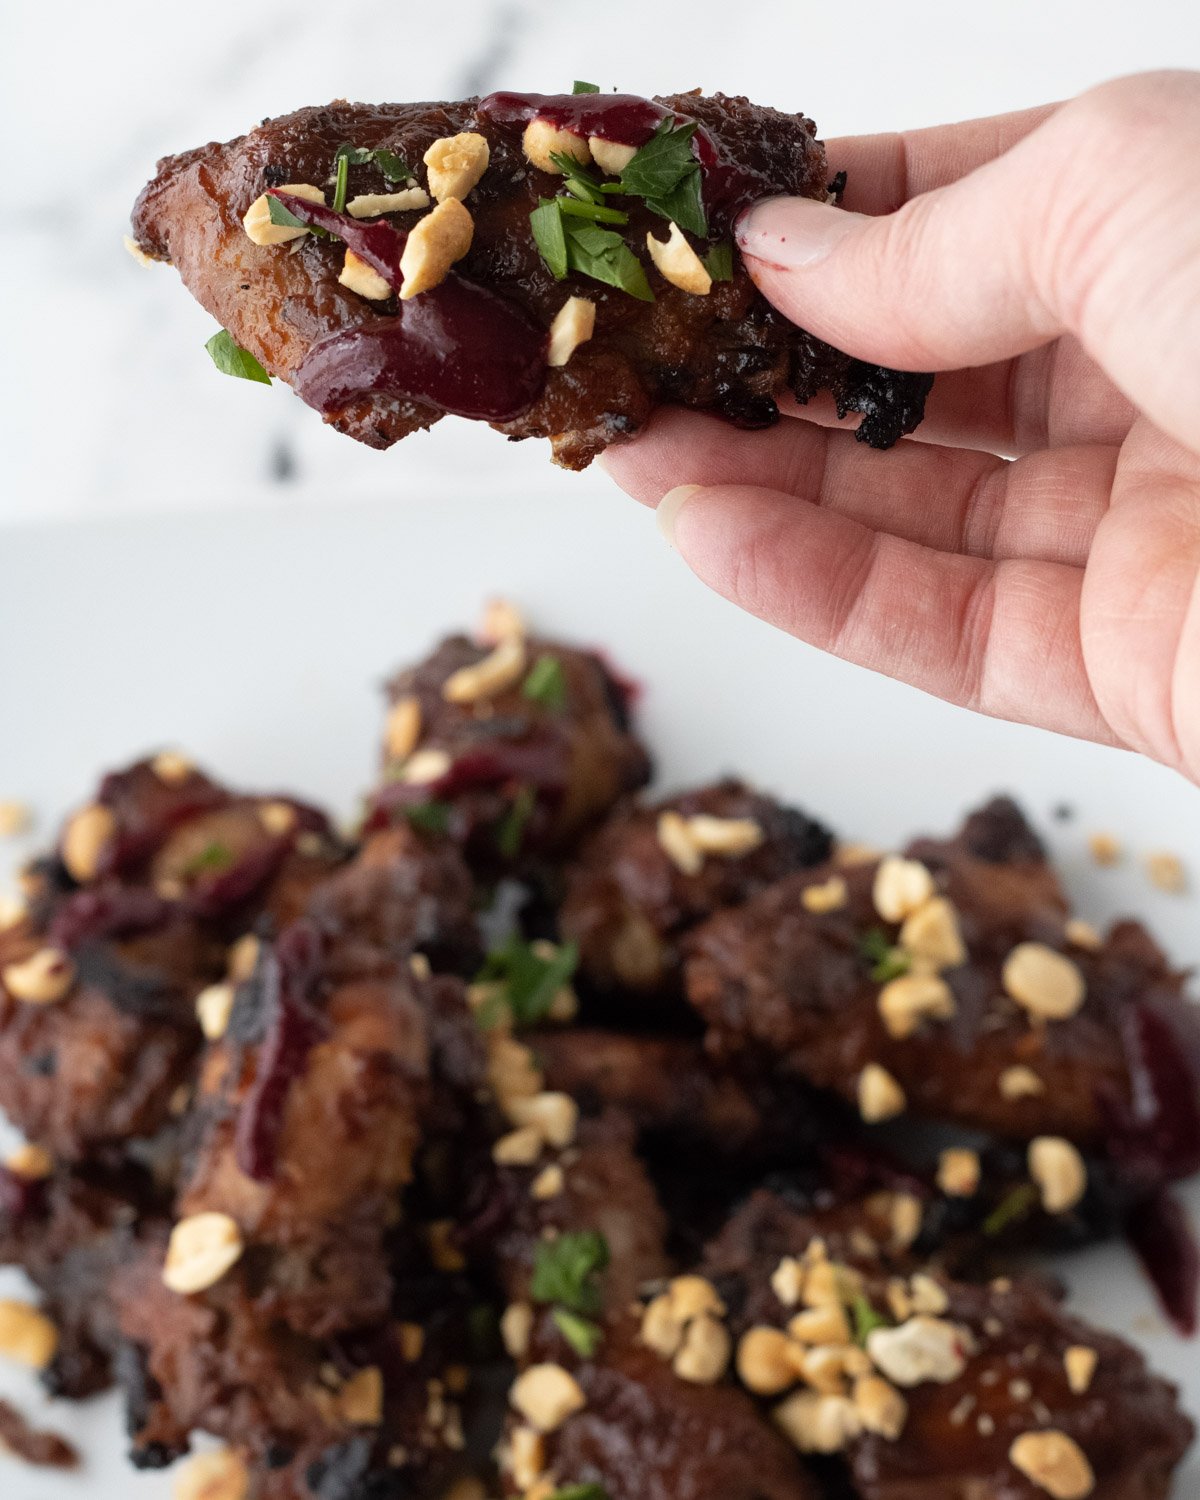 Holding a PB&J wing garnished with peanuts, cilantro, and blackberry coulis, over a plate of wings.